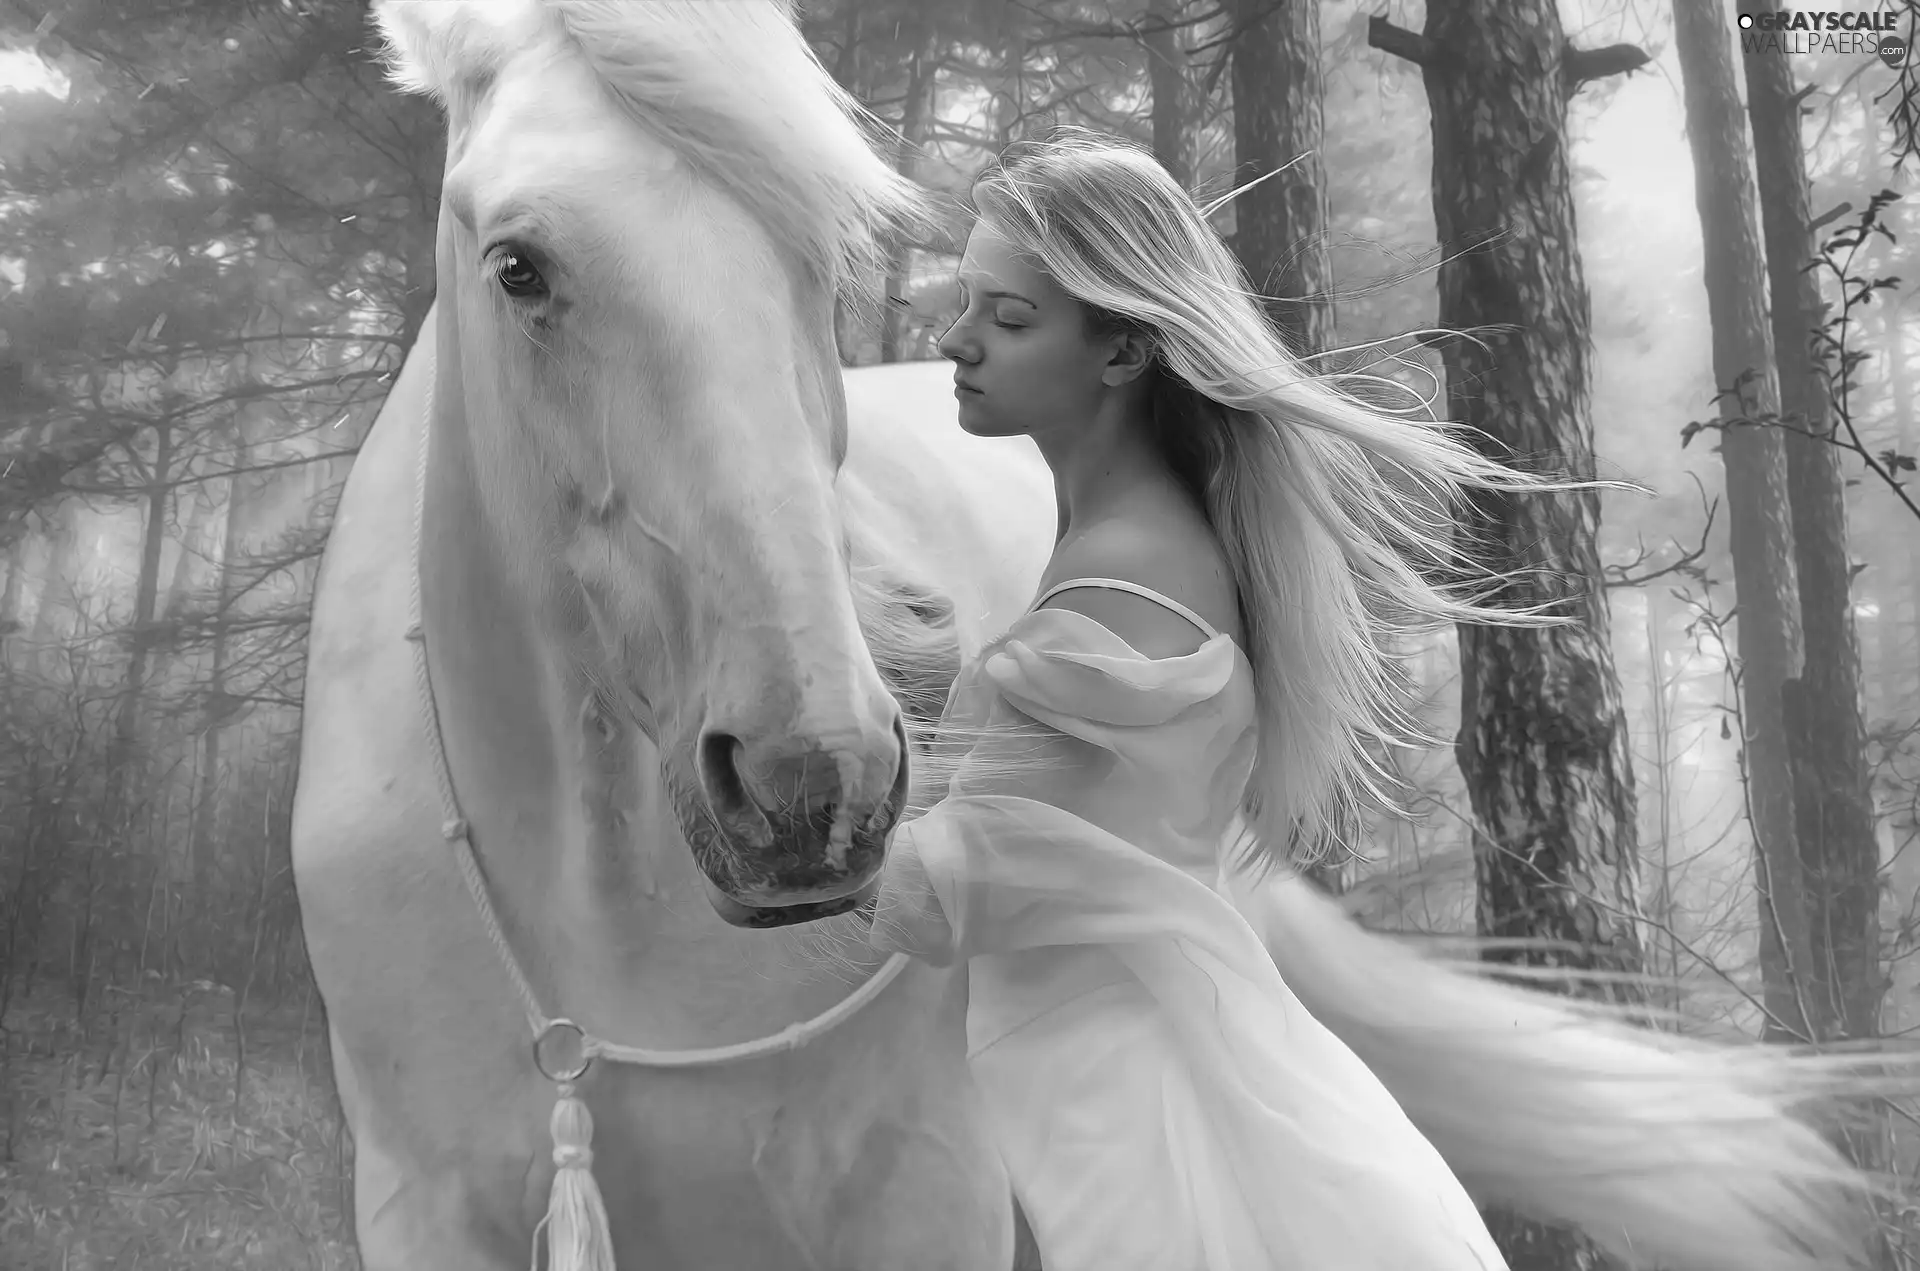 Horse, White, girl, Blonde, viewes, graphics, Dress, trees, White